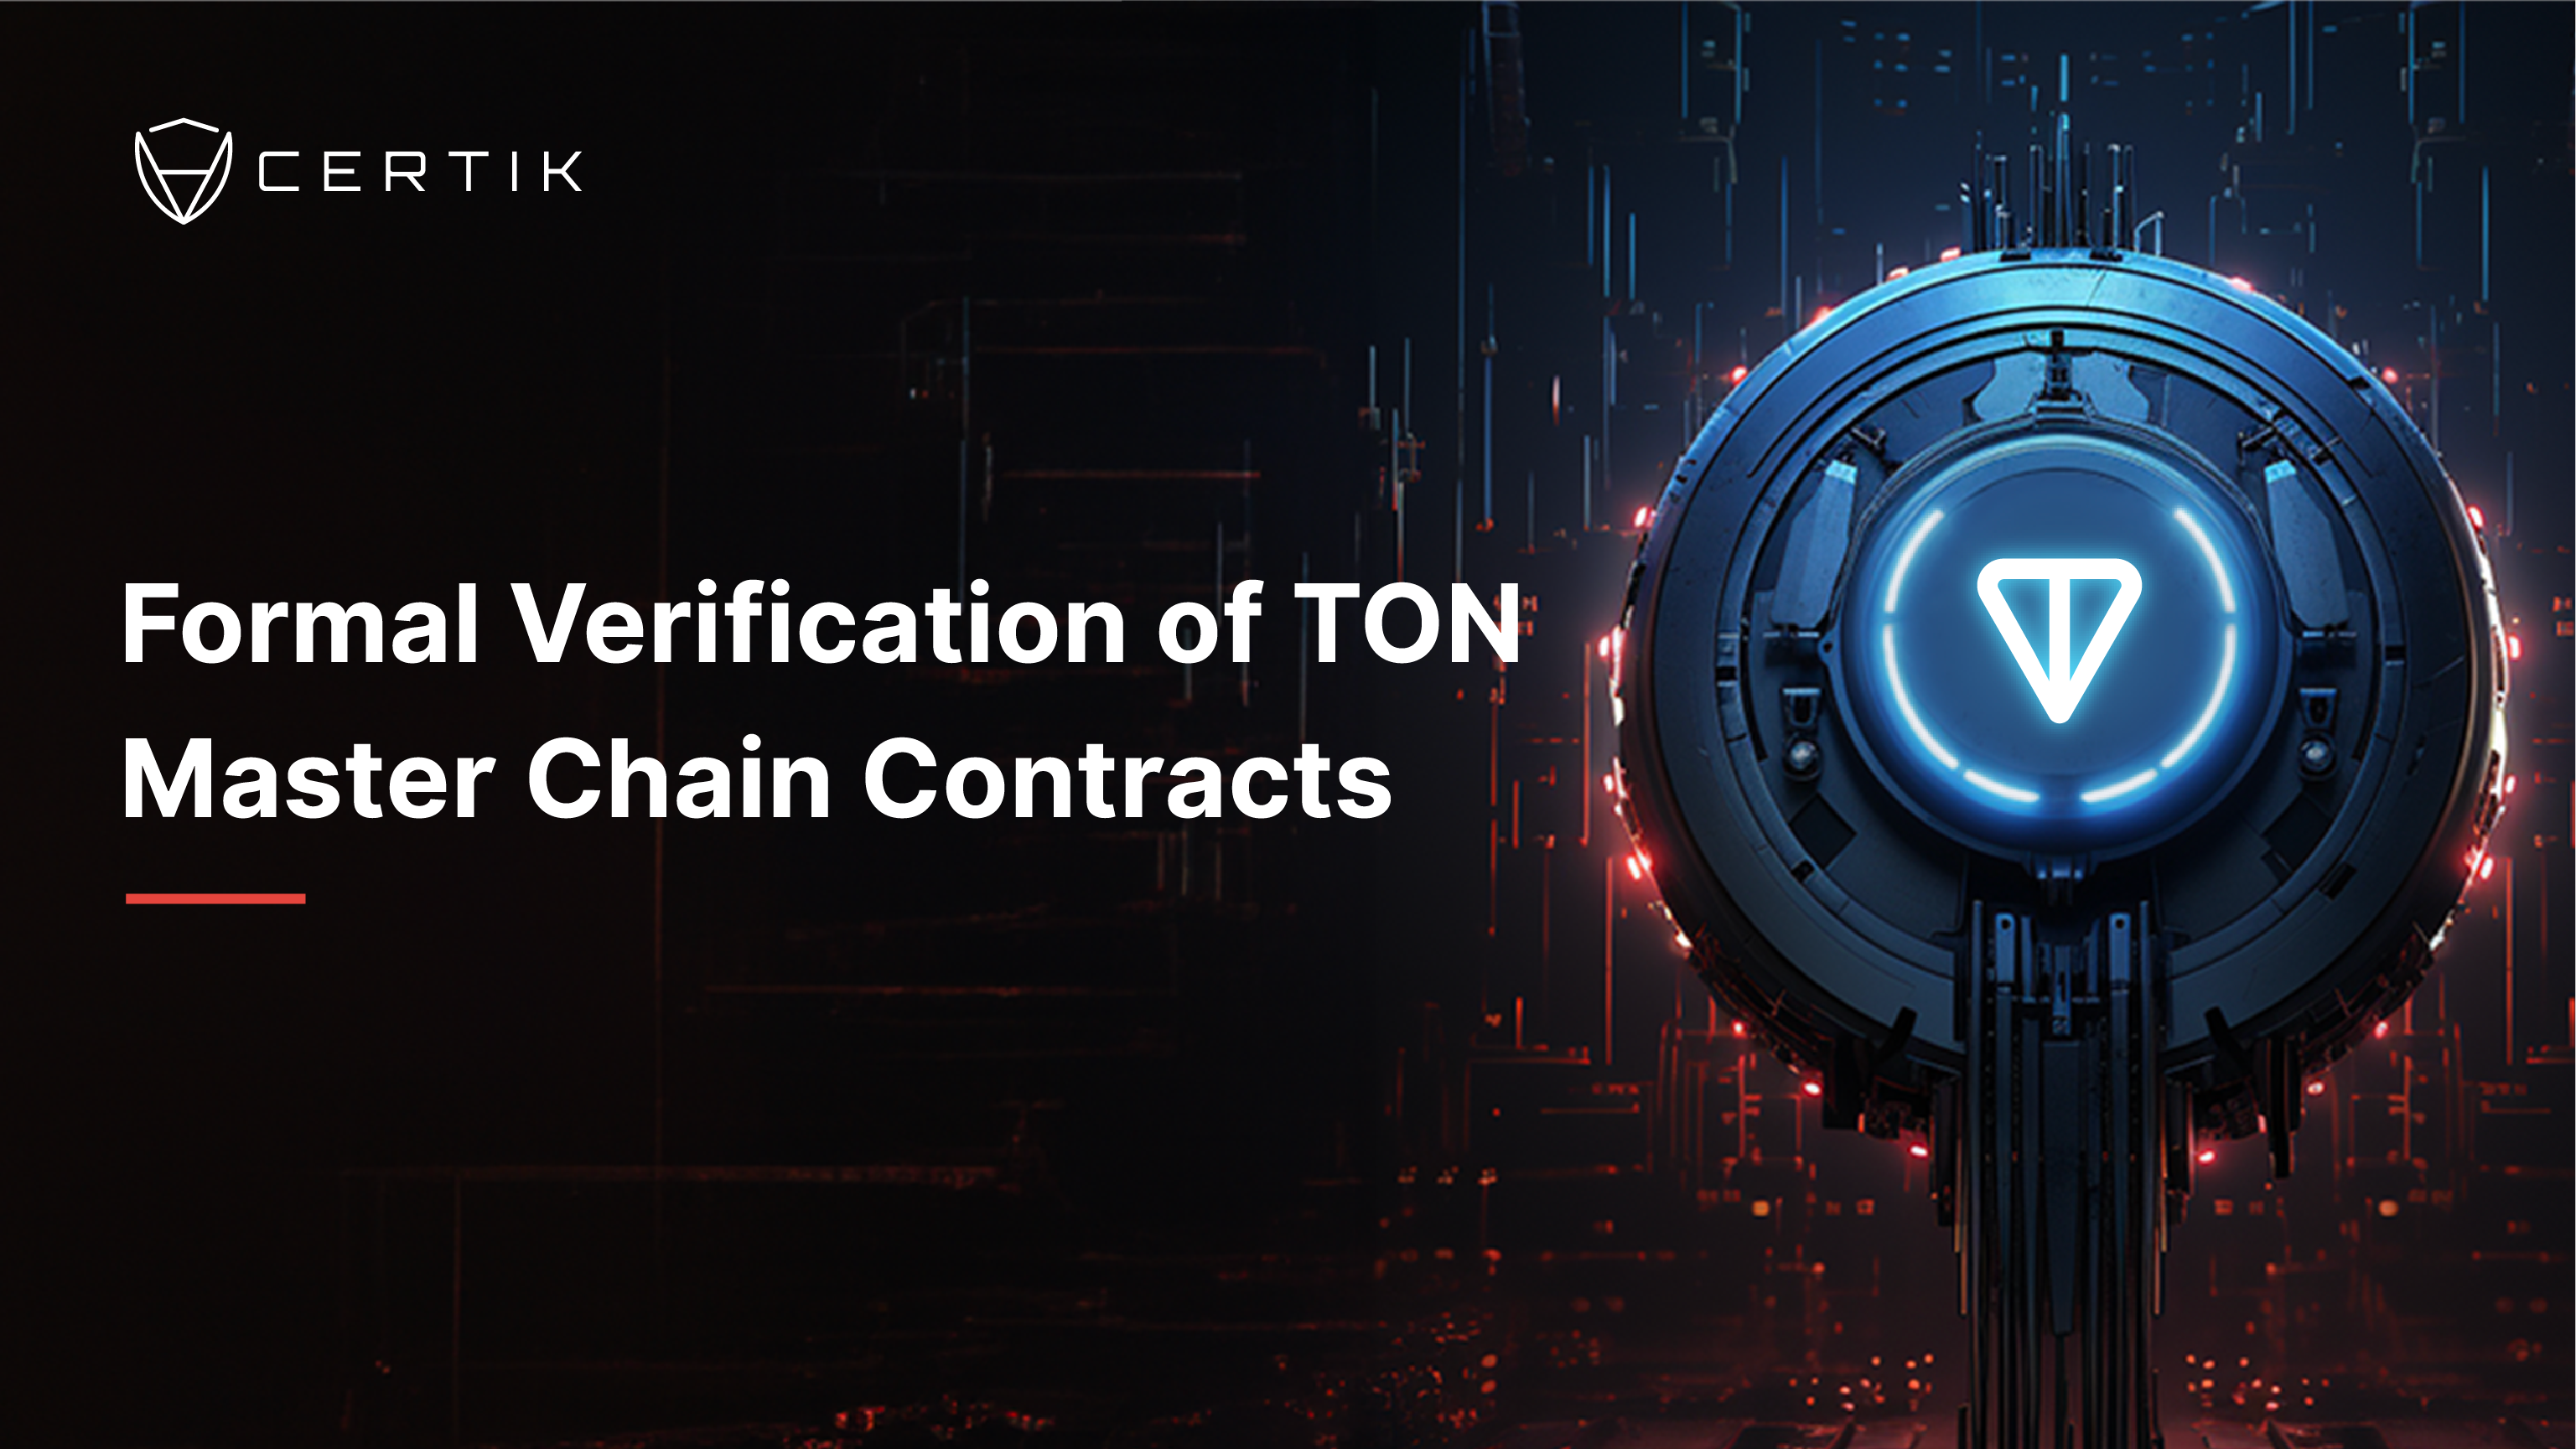 Formal Verification of TON Master Chain Contracts